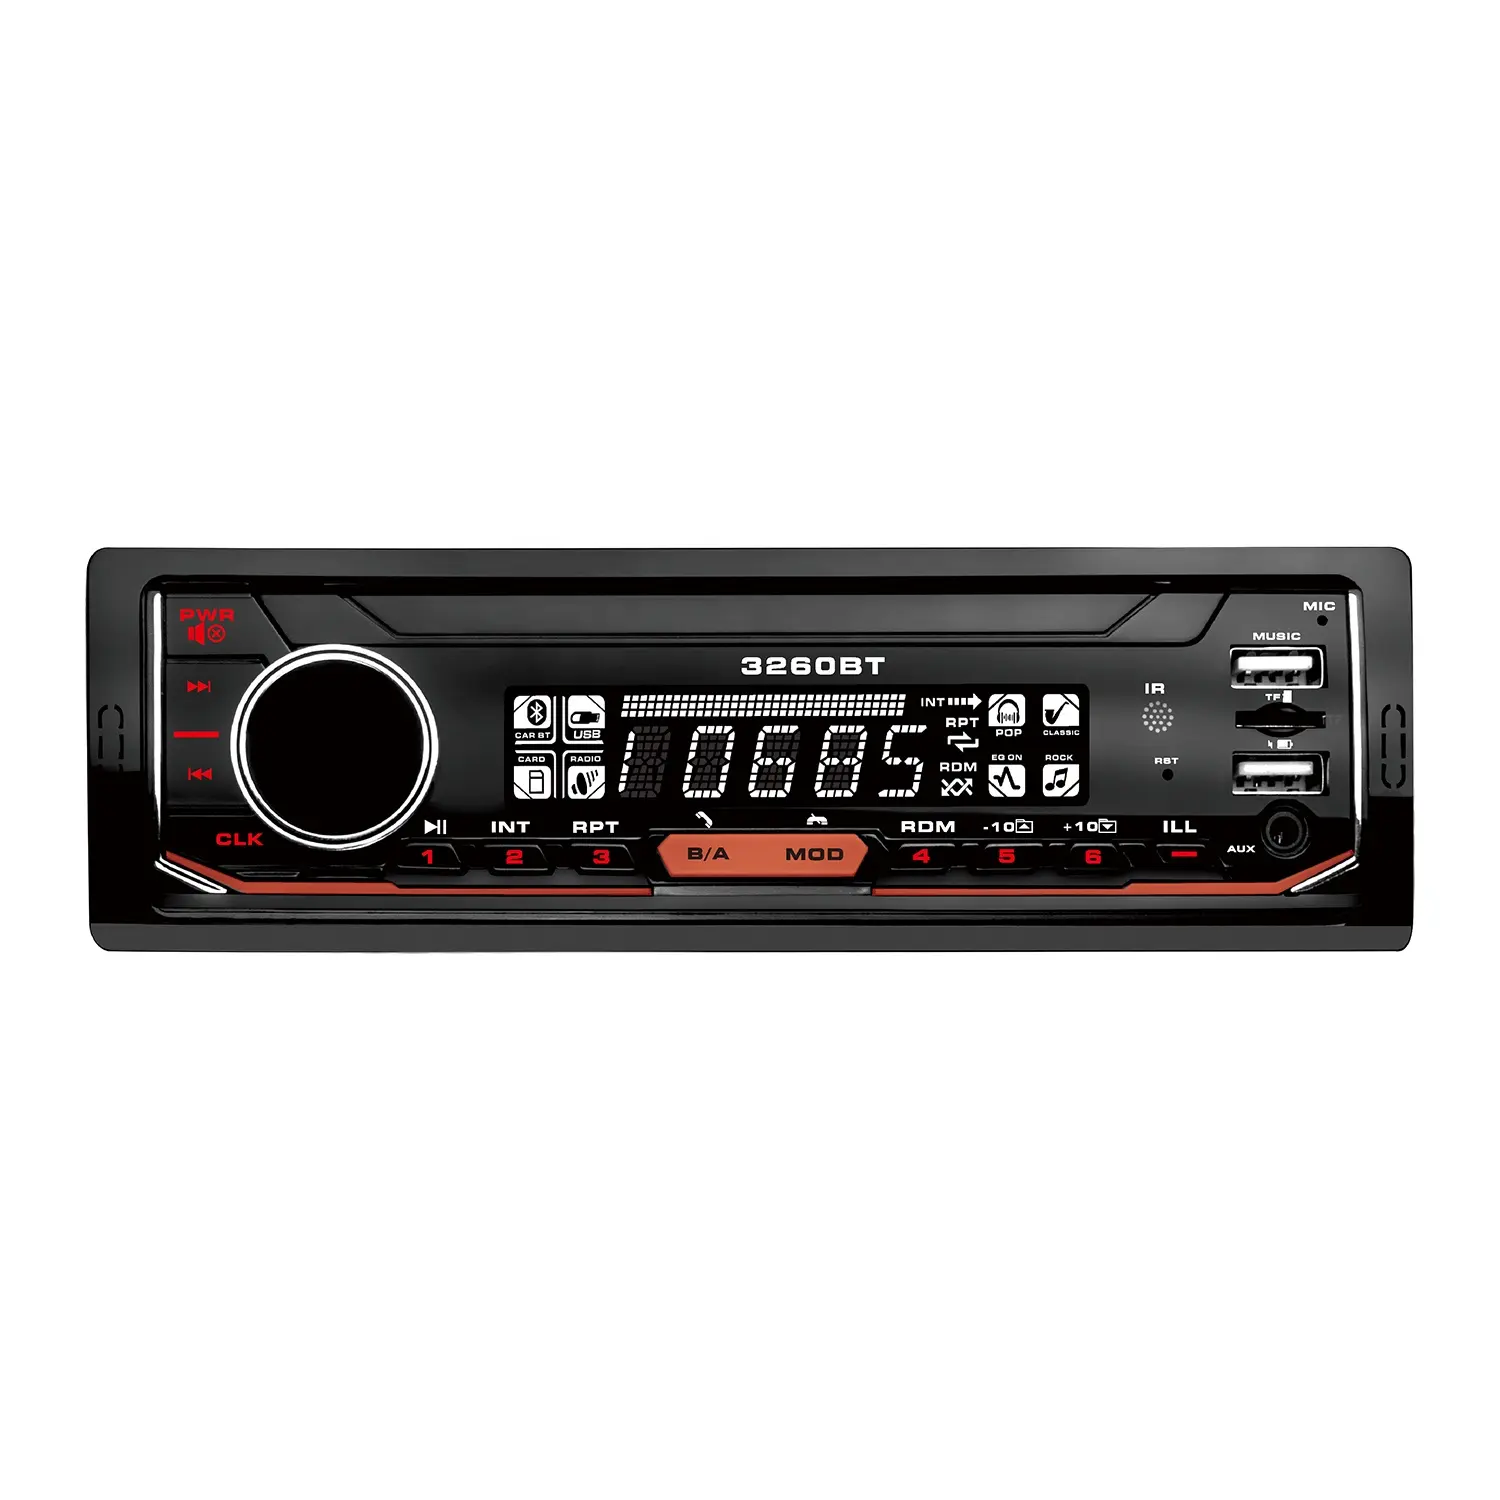 Single DIN Bluetooth-Enabled Car Radio Stereo with USB MP3 Player USB/SD PC Interface RDS/LCD Screen User Manual Enabled